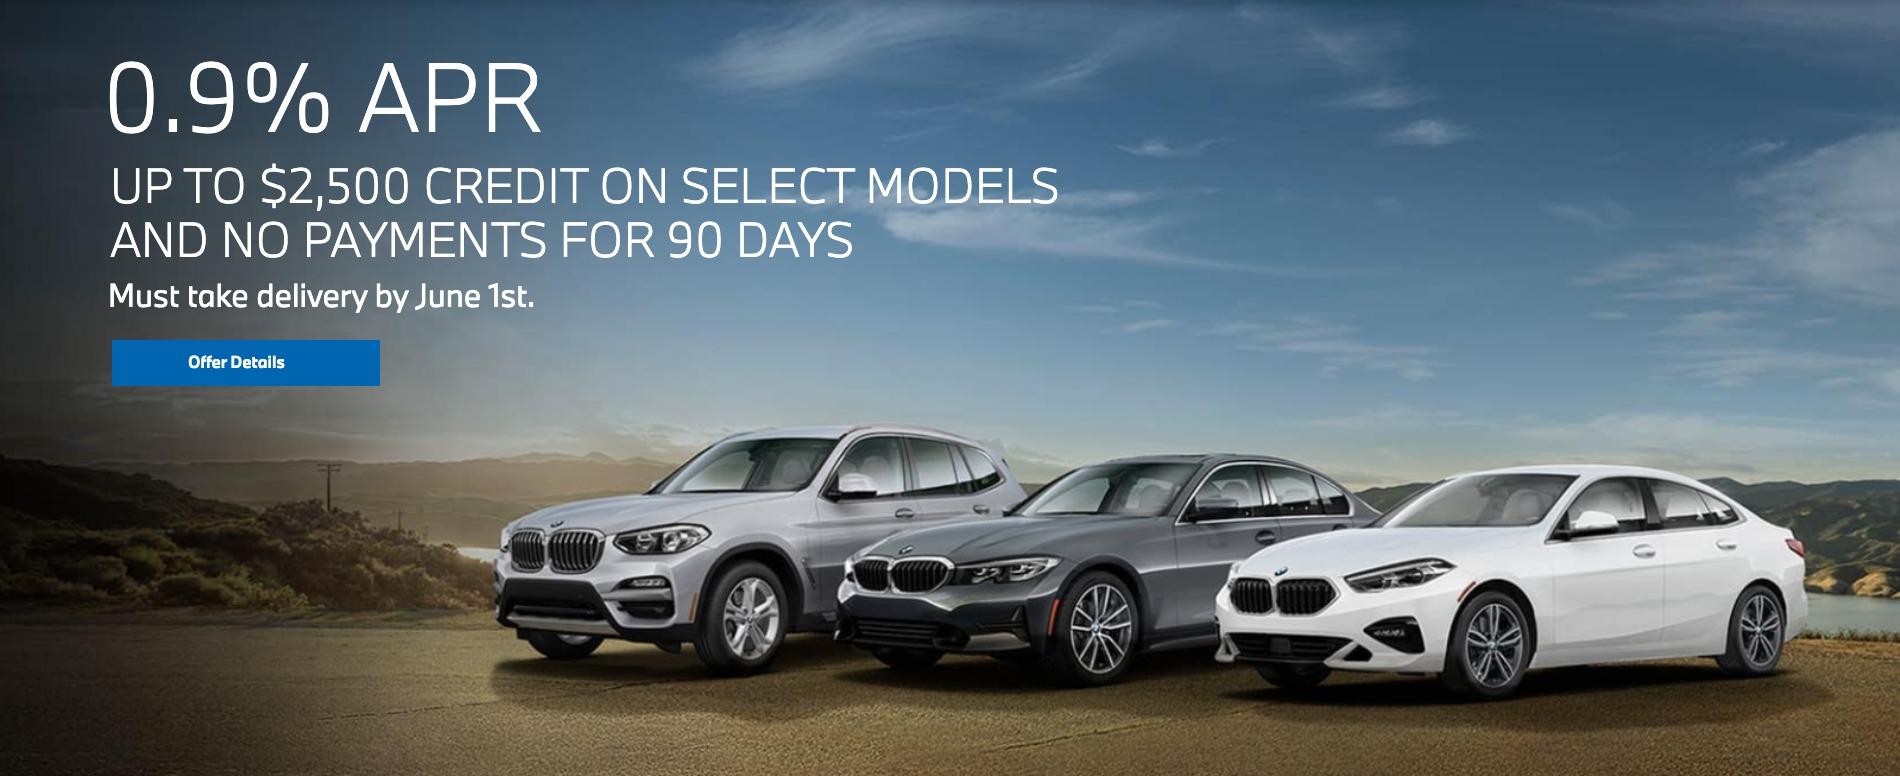 BMW 0.9% APR. Up to $2,500 credit on select models and no payments for 90 days.